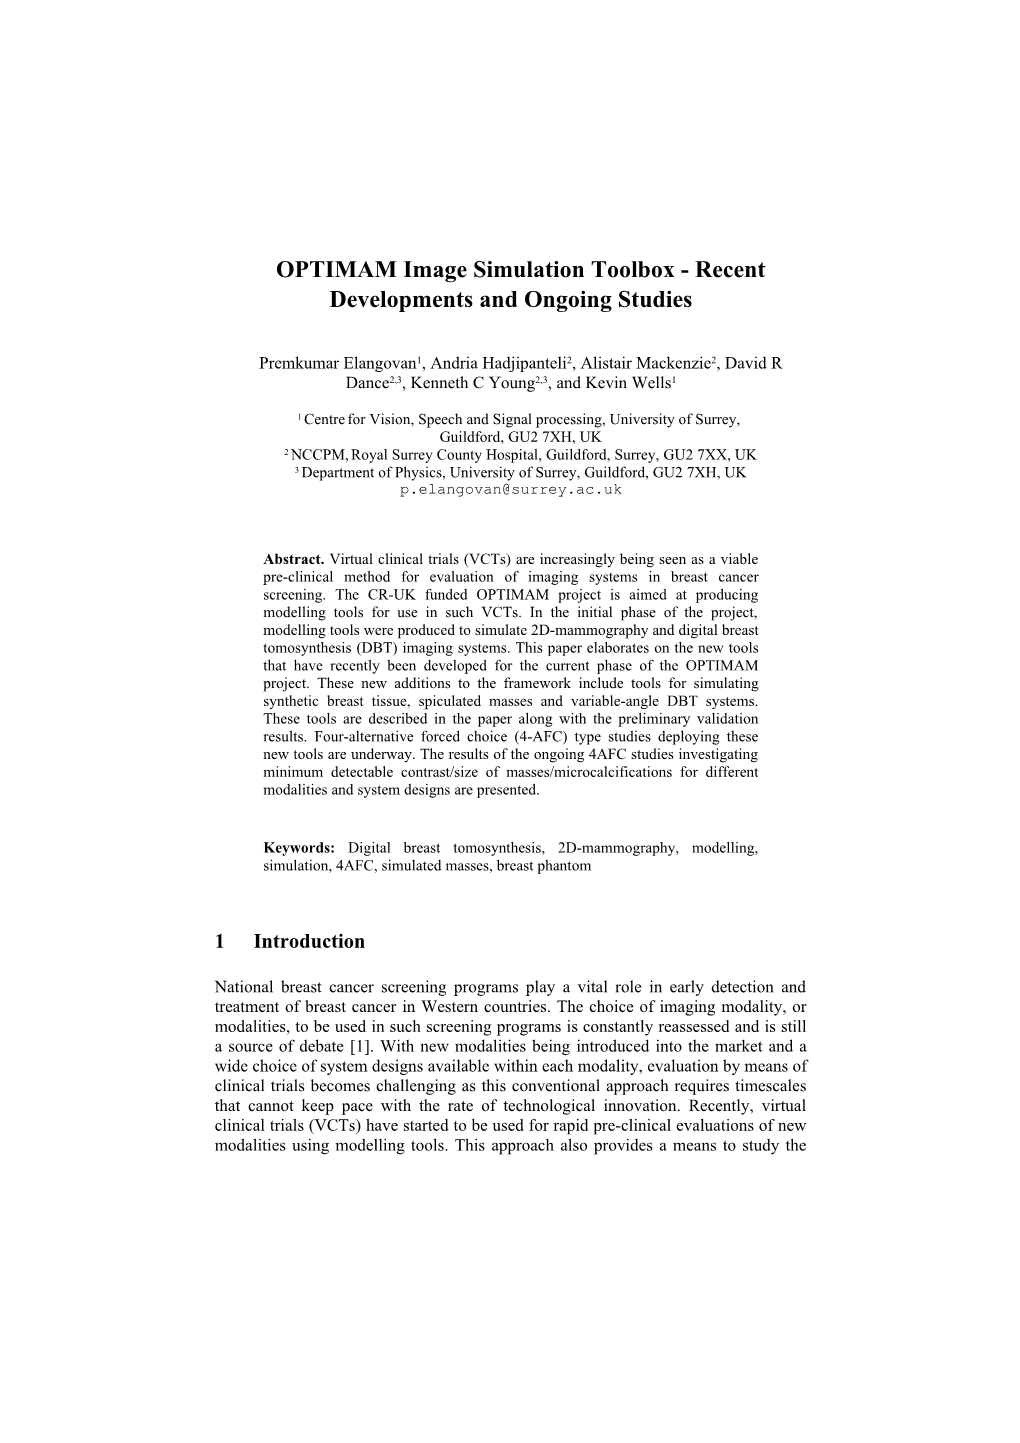 OPTIMAM Image Simulation Toolbox -Recent Developments and Ongoing Studies